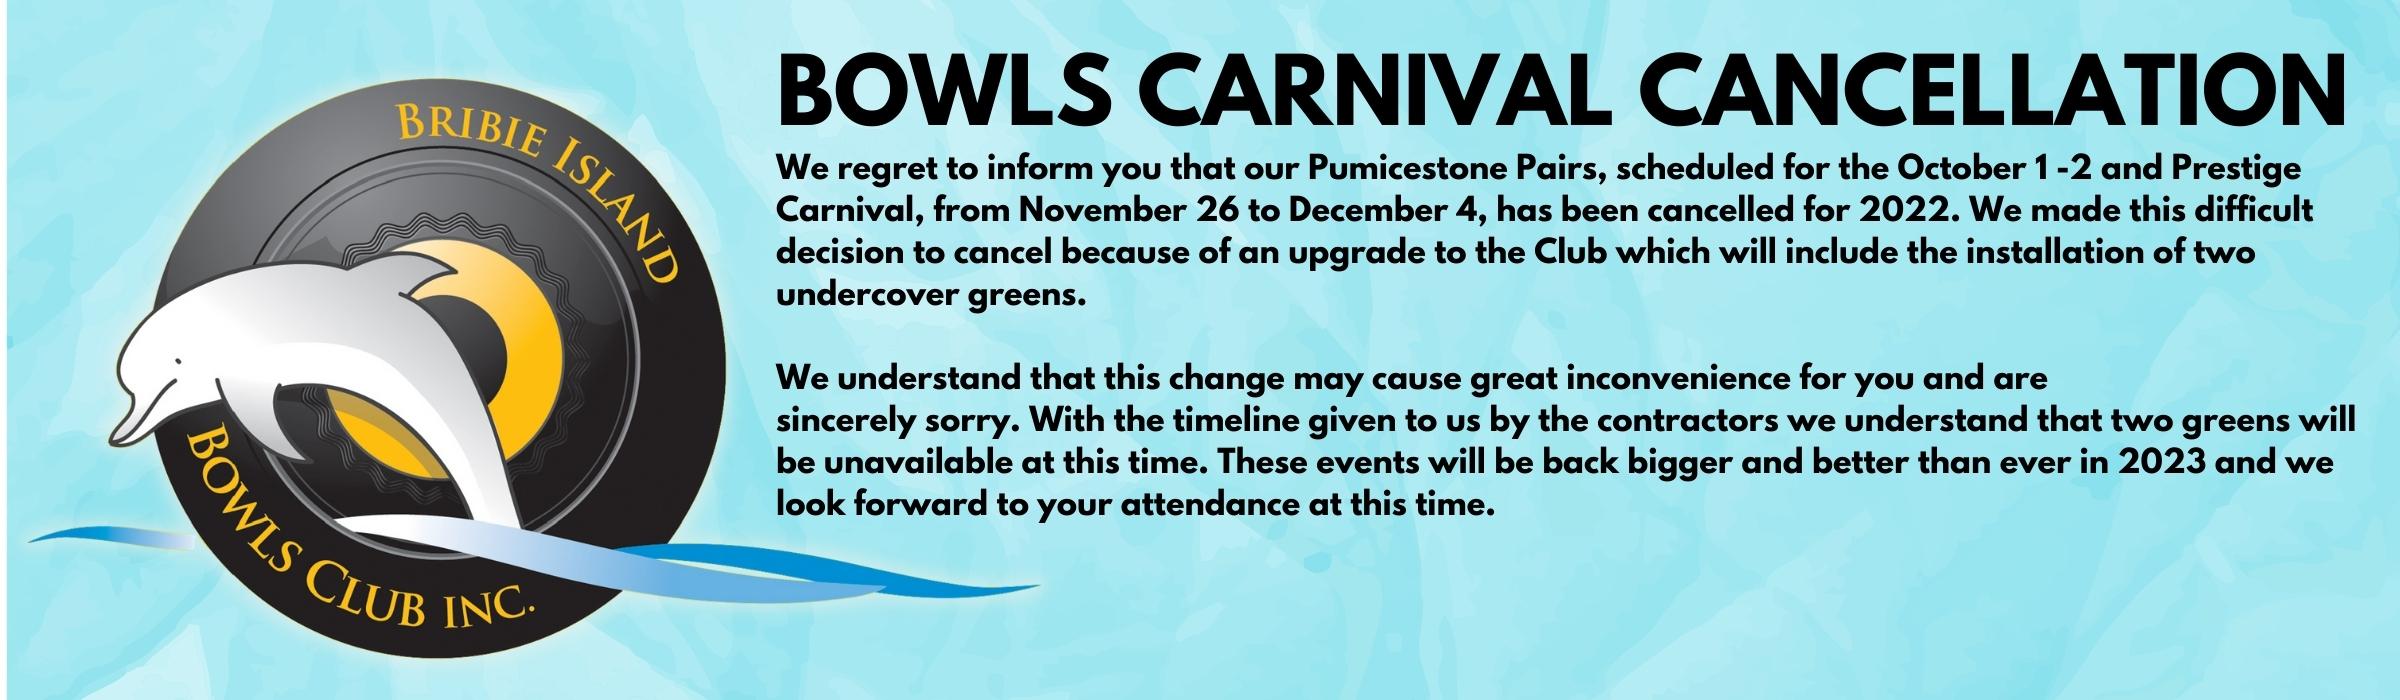 carnival cancellations